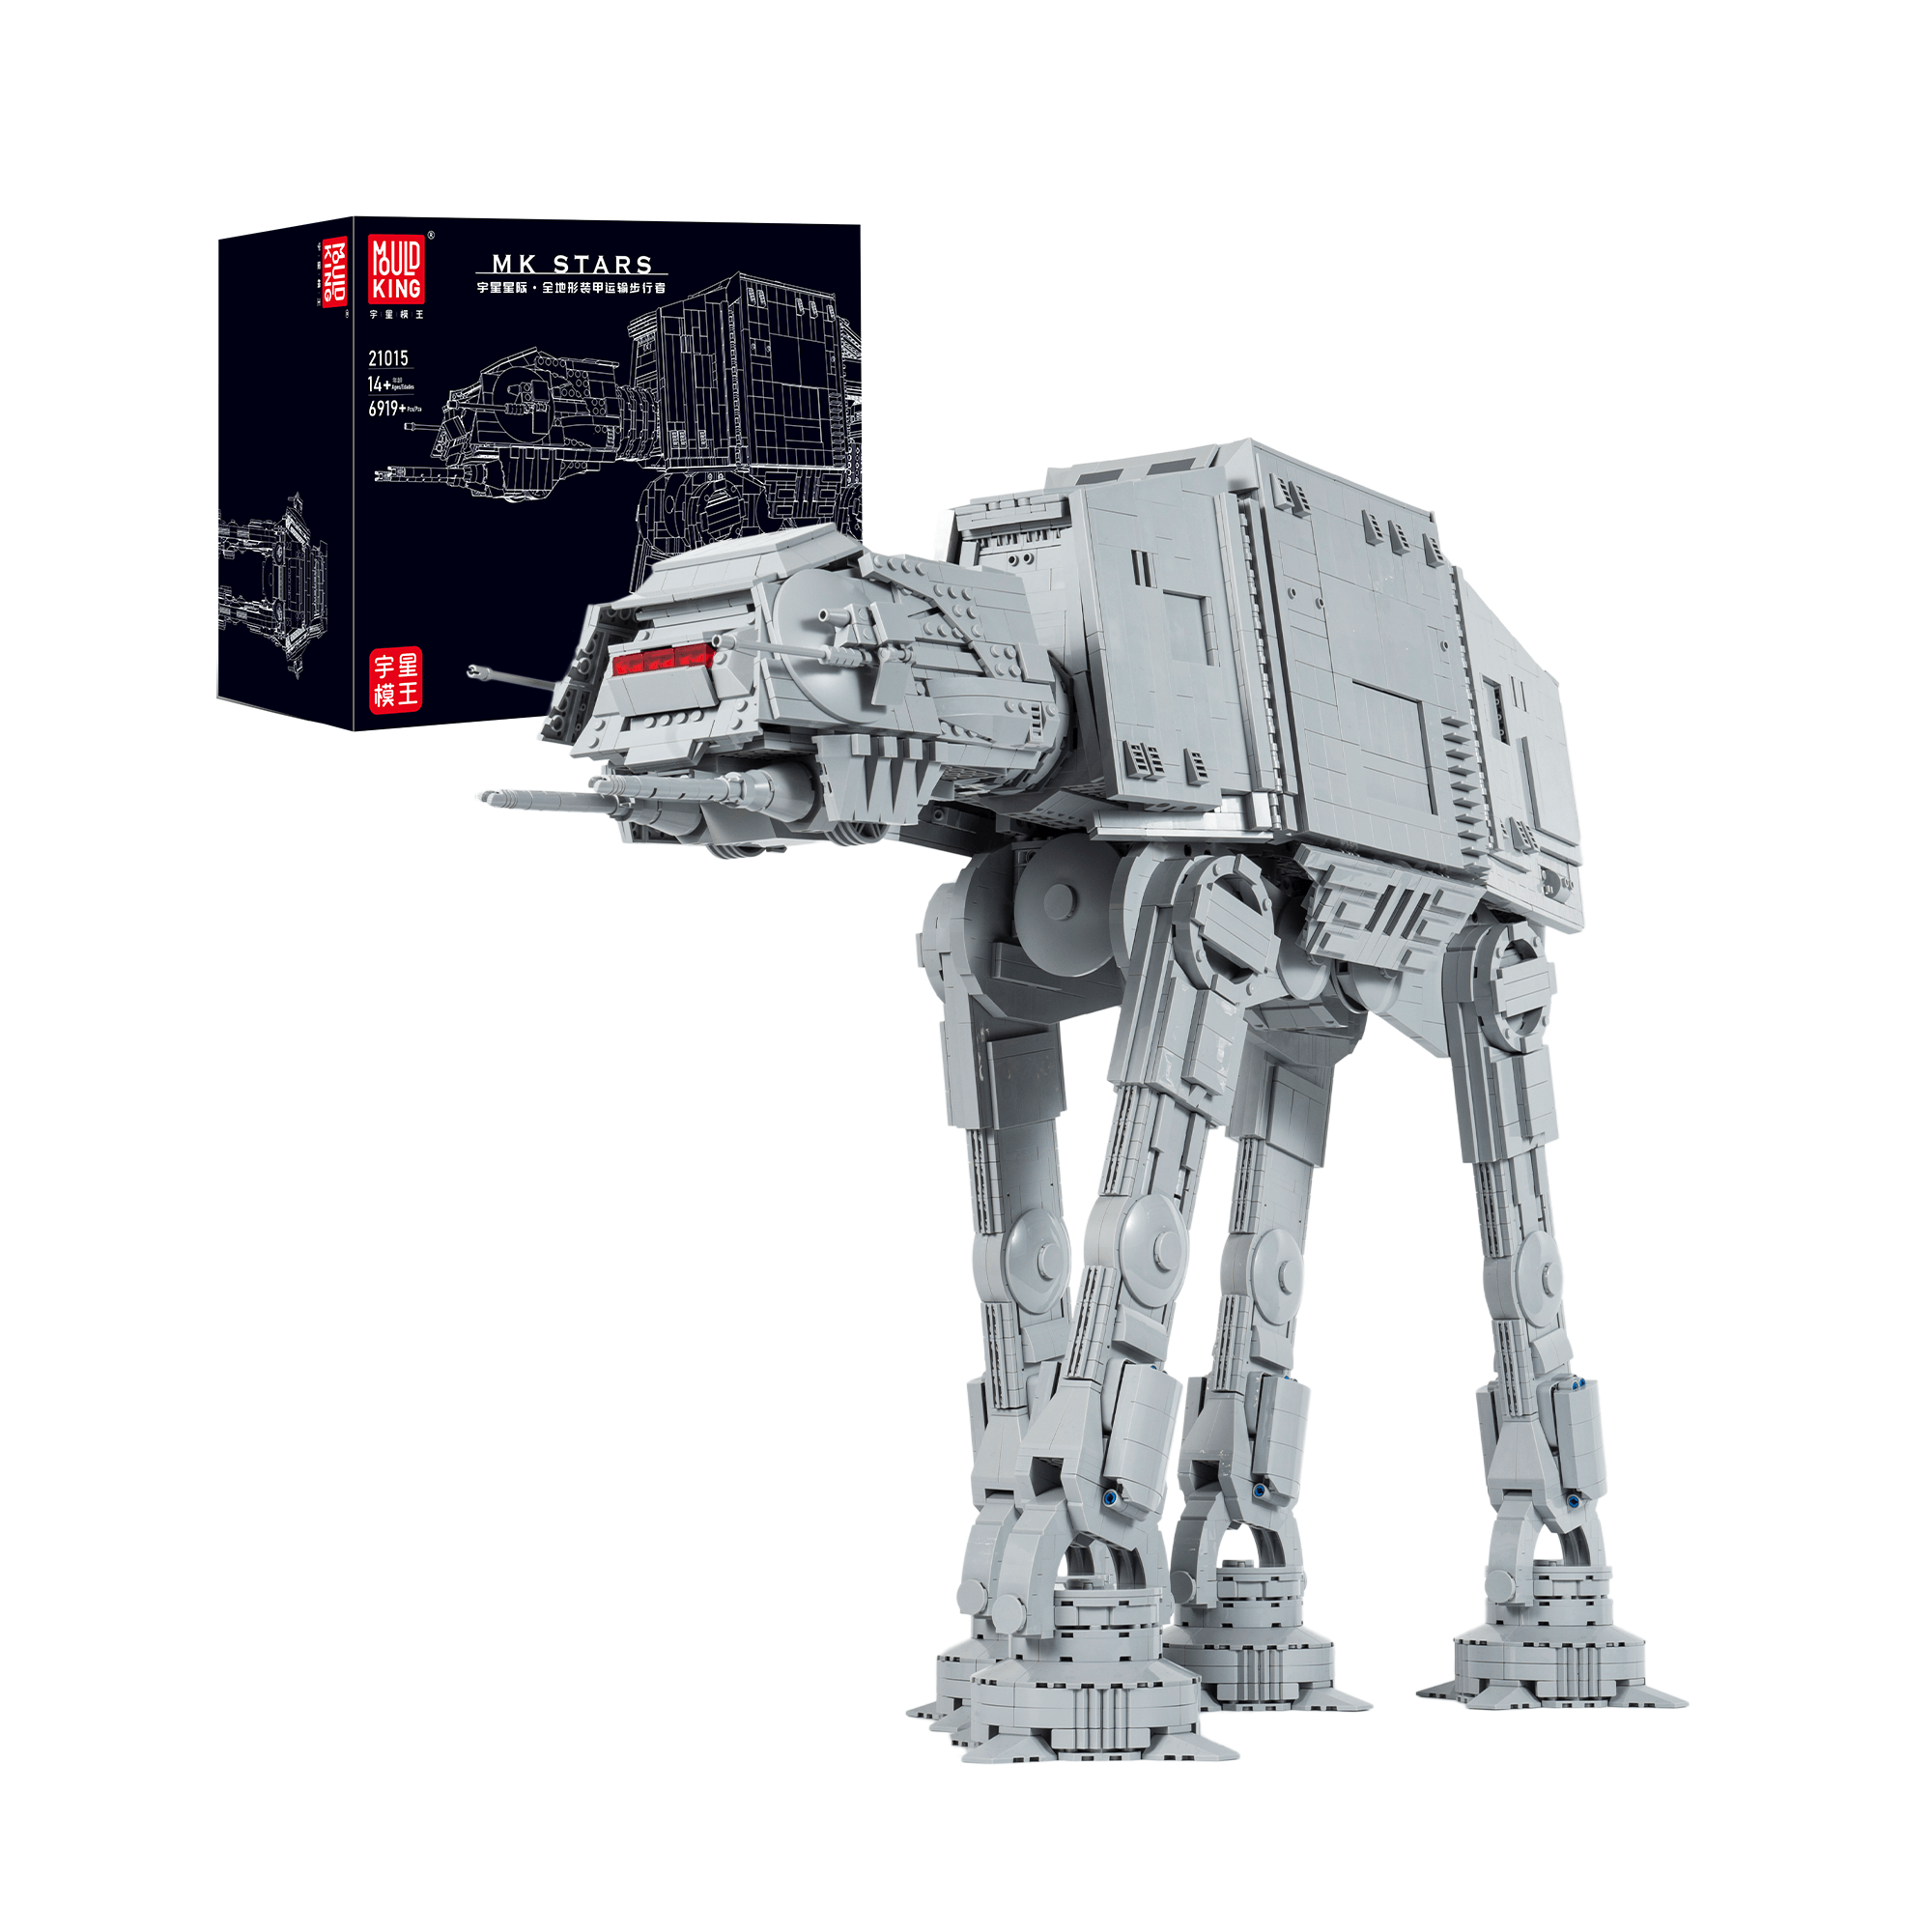 AT-AT set showdown - Mould King vs Lego UCS - Which is the better set? 